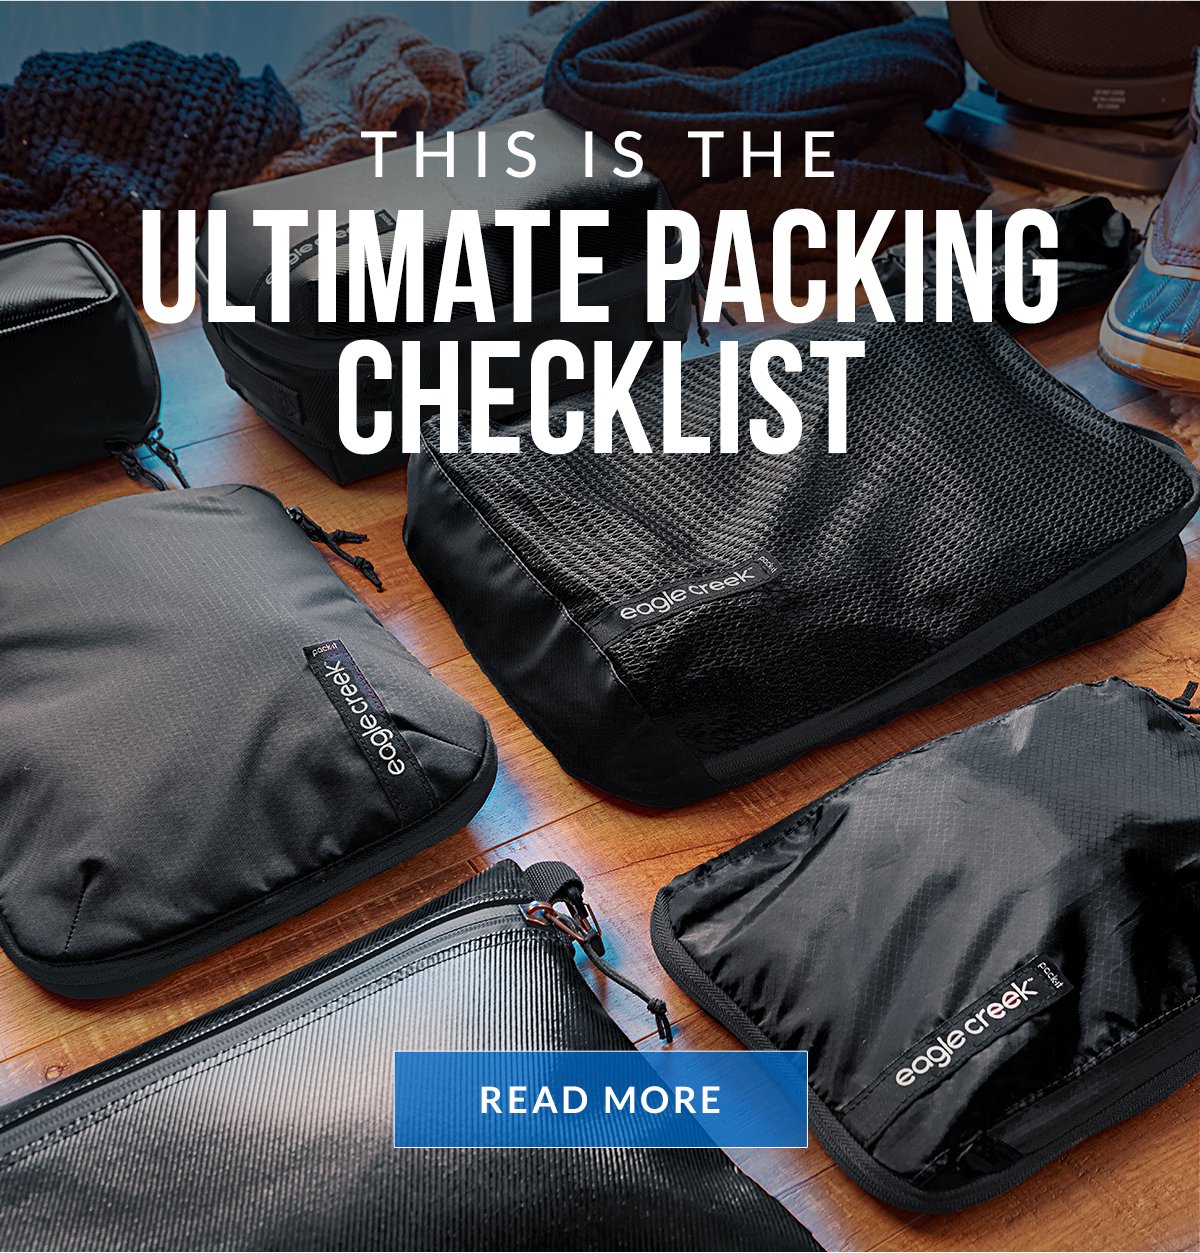 Read our Ultimate Packing Checklist